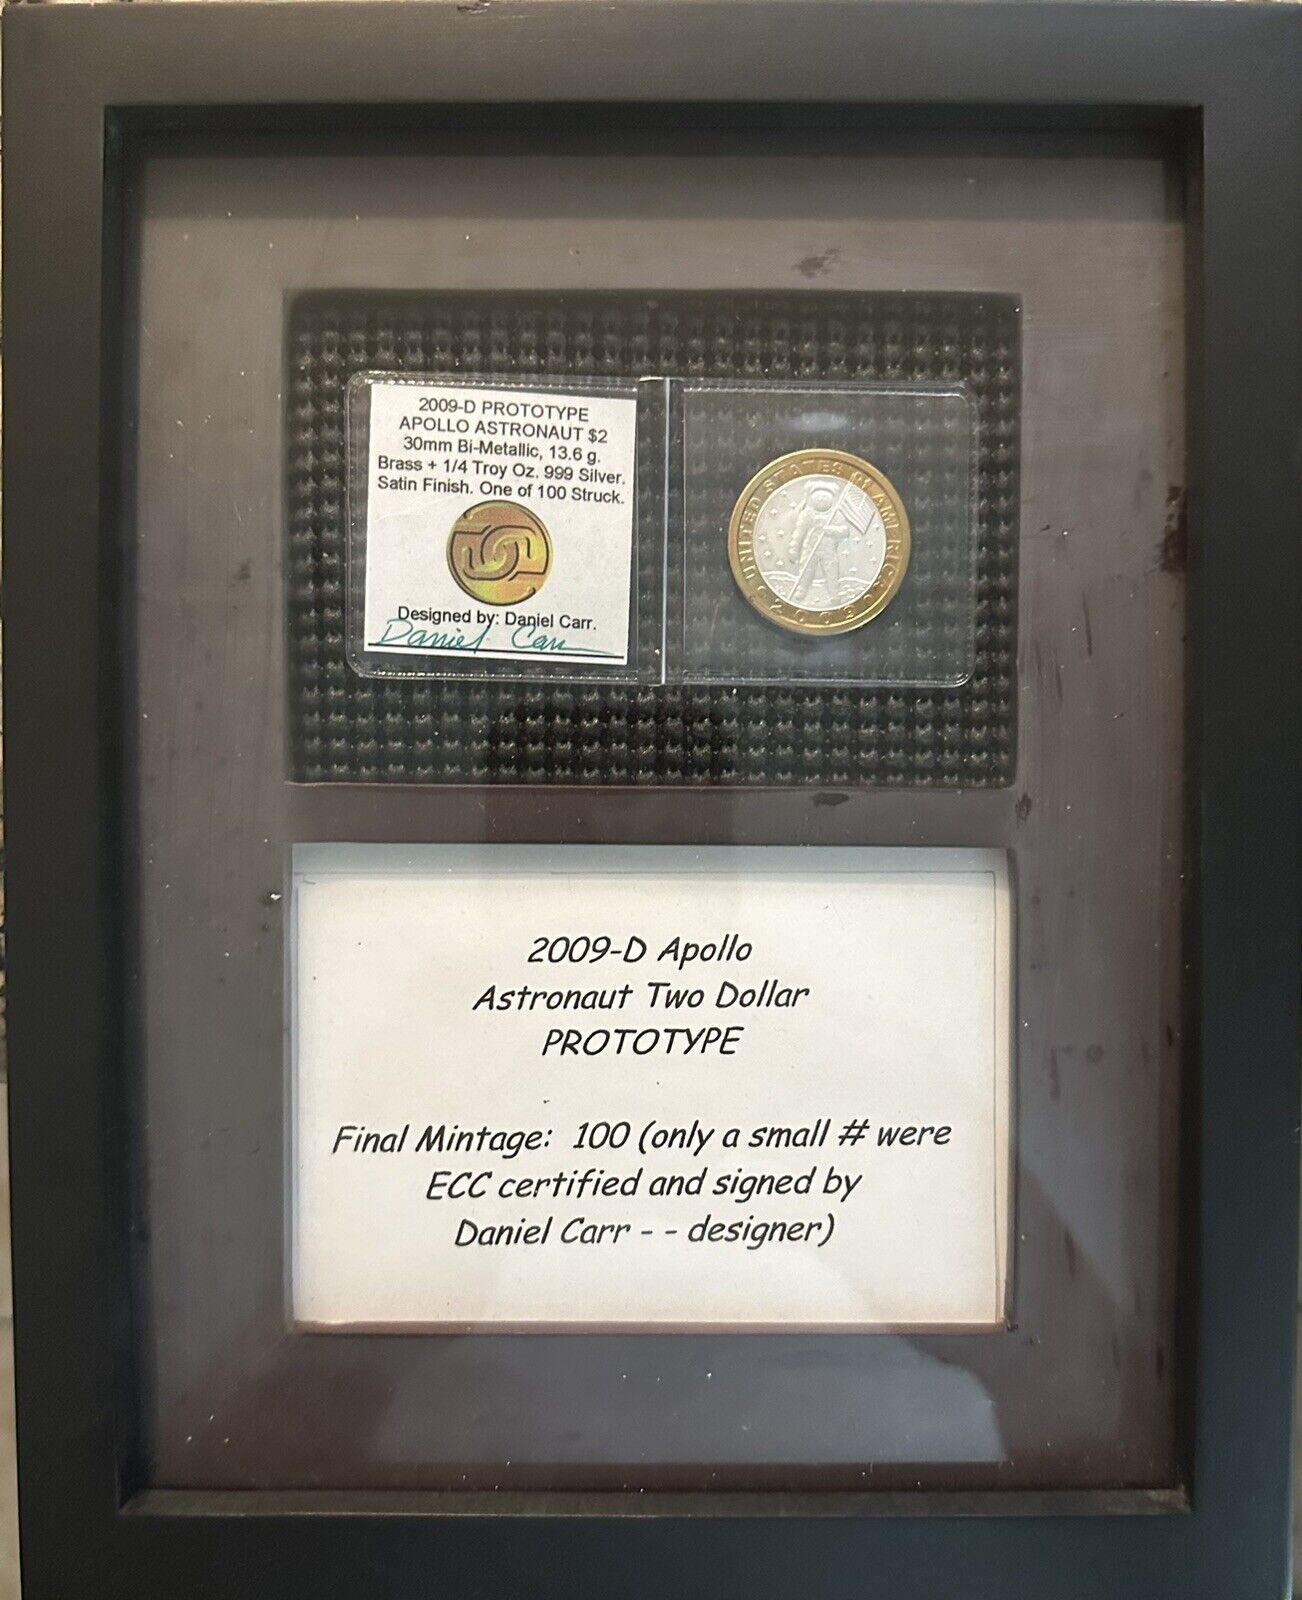 Framed Display Of 2009-D Apollo Astronaut Two Dollar Prototype Coin Signed